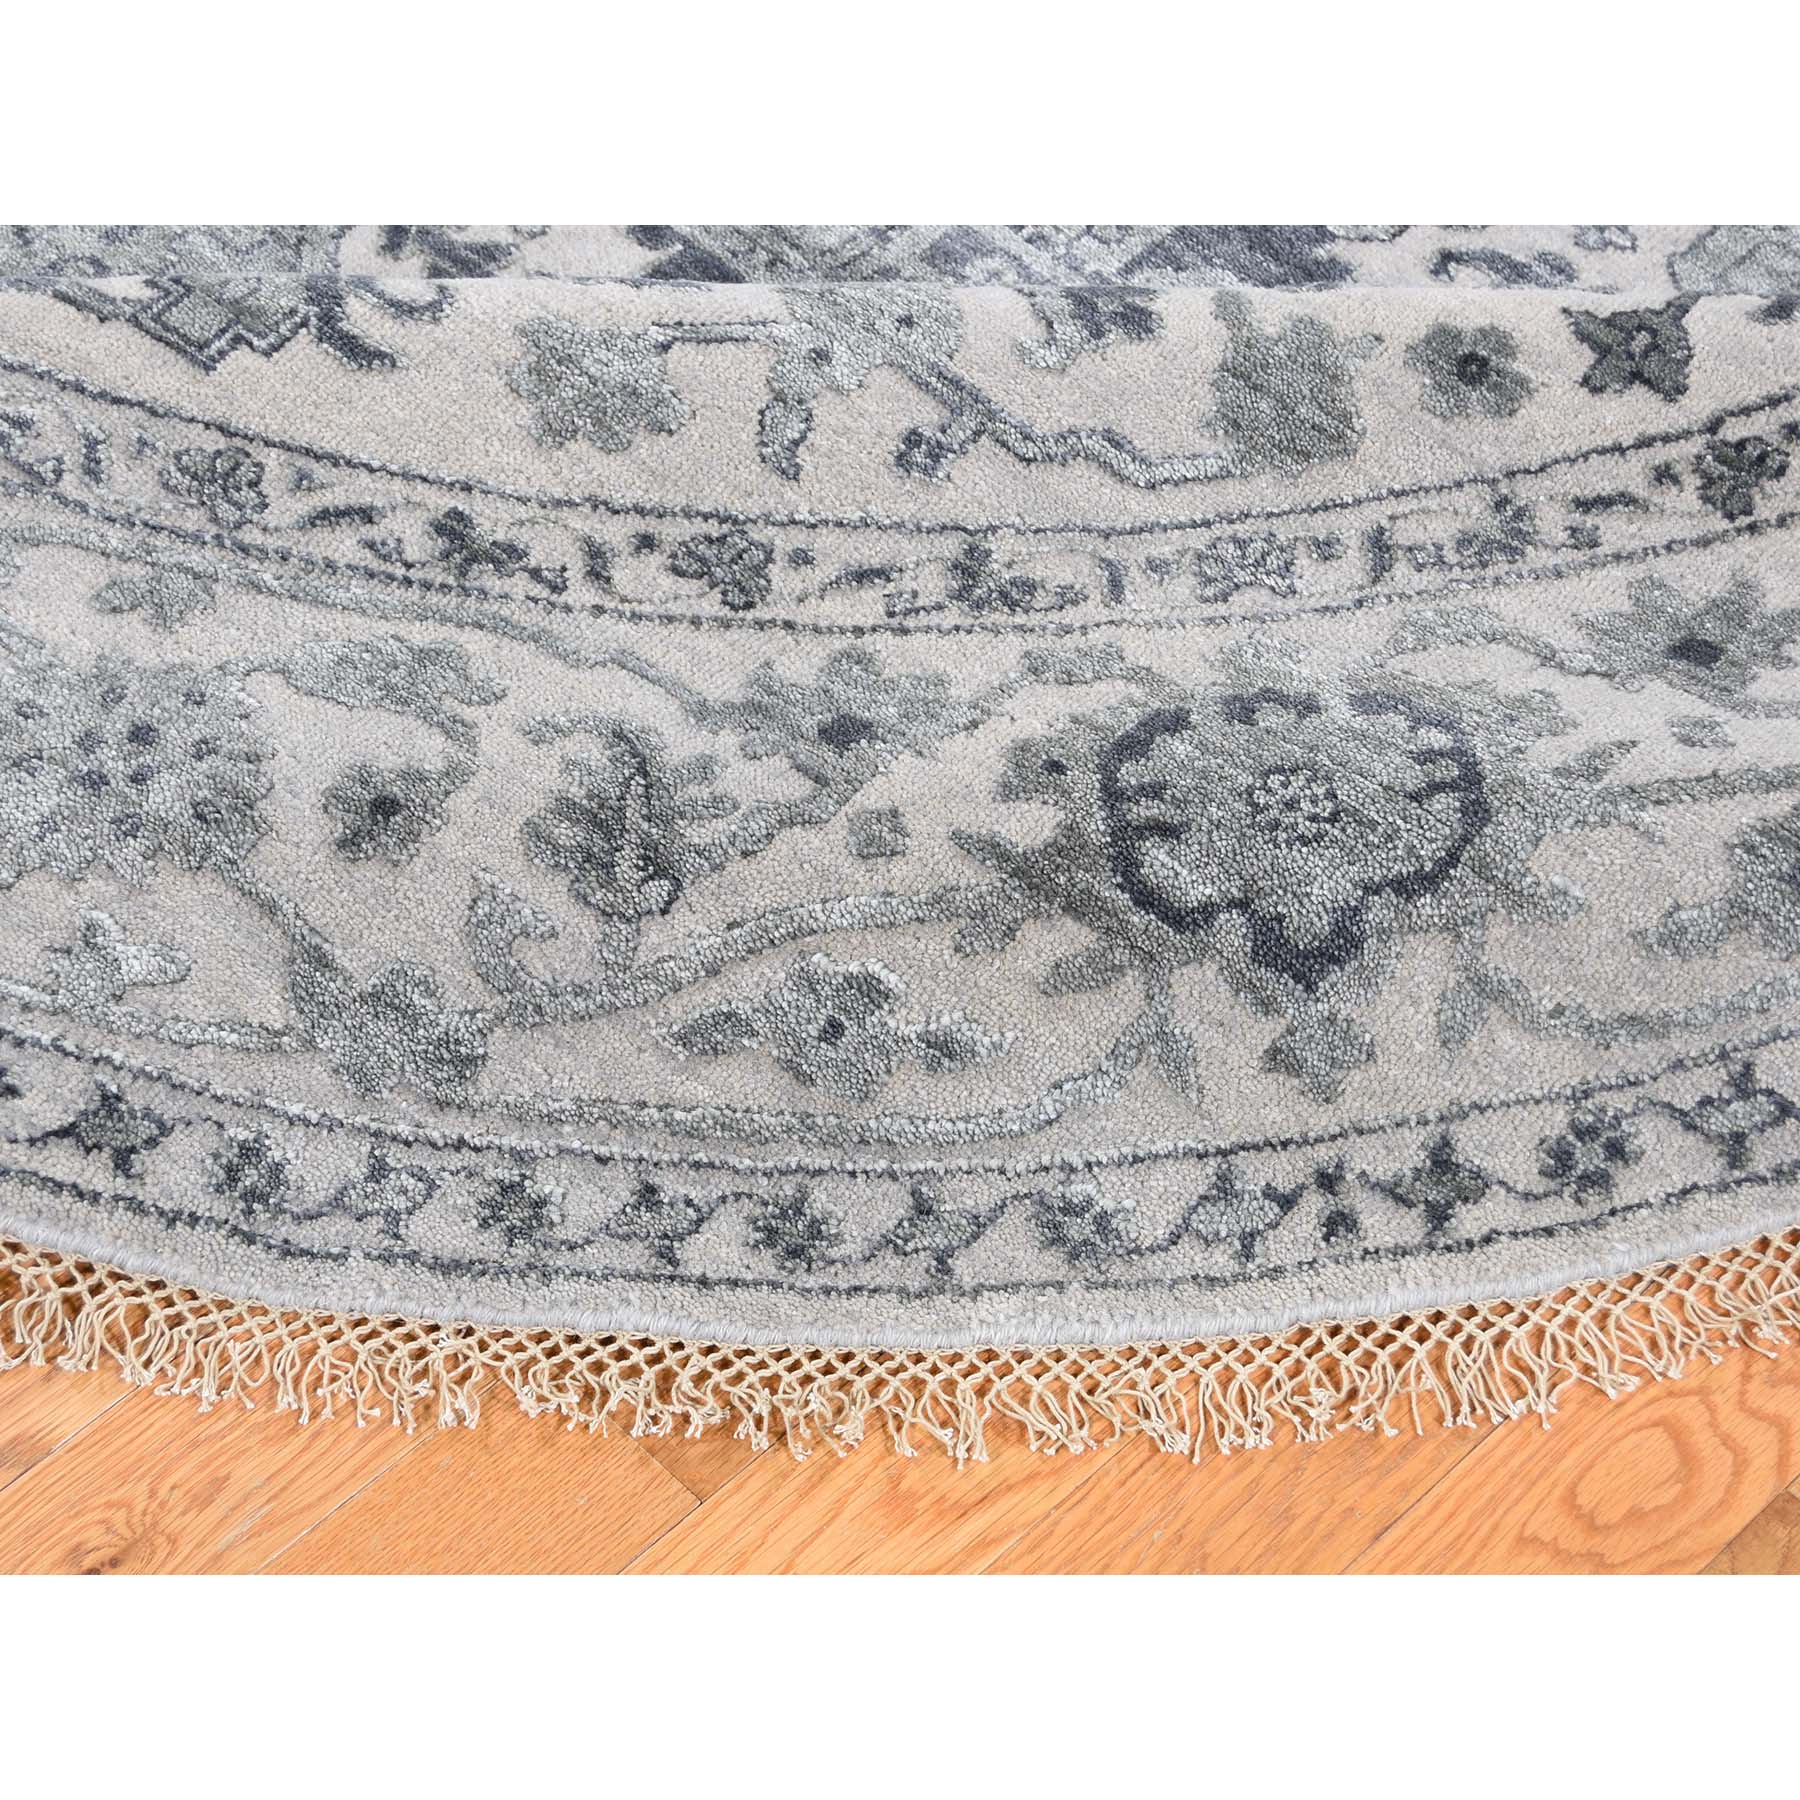 8-1 x8-1  Silver Heriz Design Wool And Silk Hi-lo Pile Hand-Knotted Round Oriental Rug 